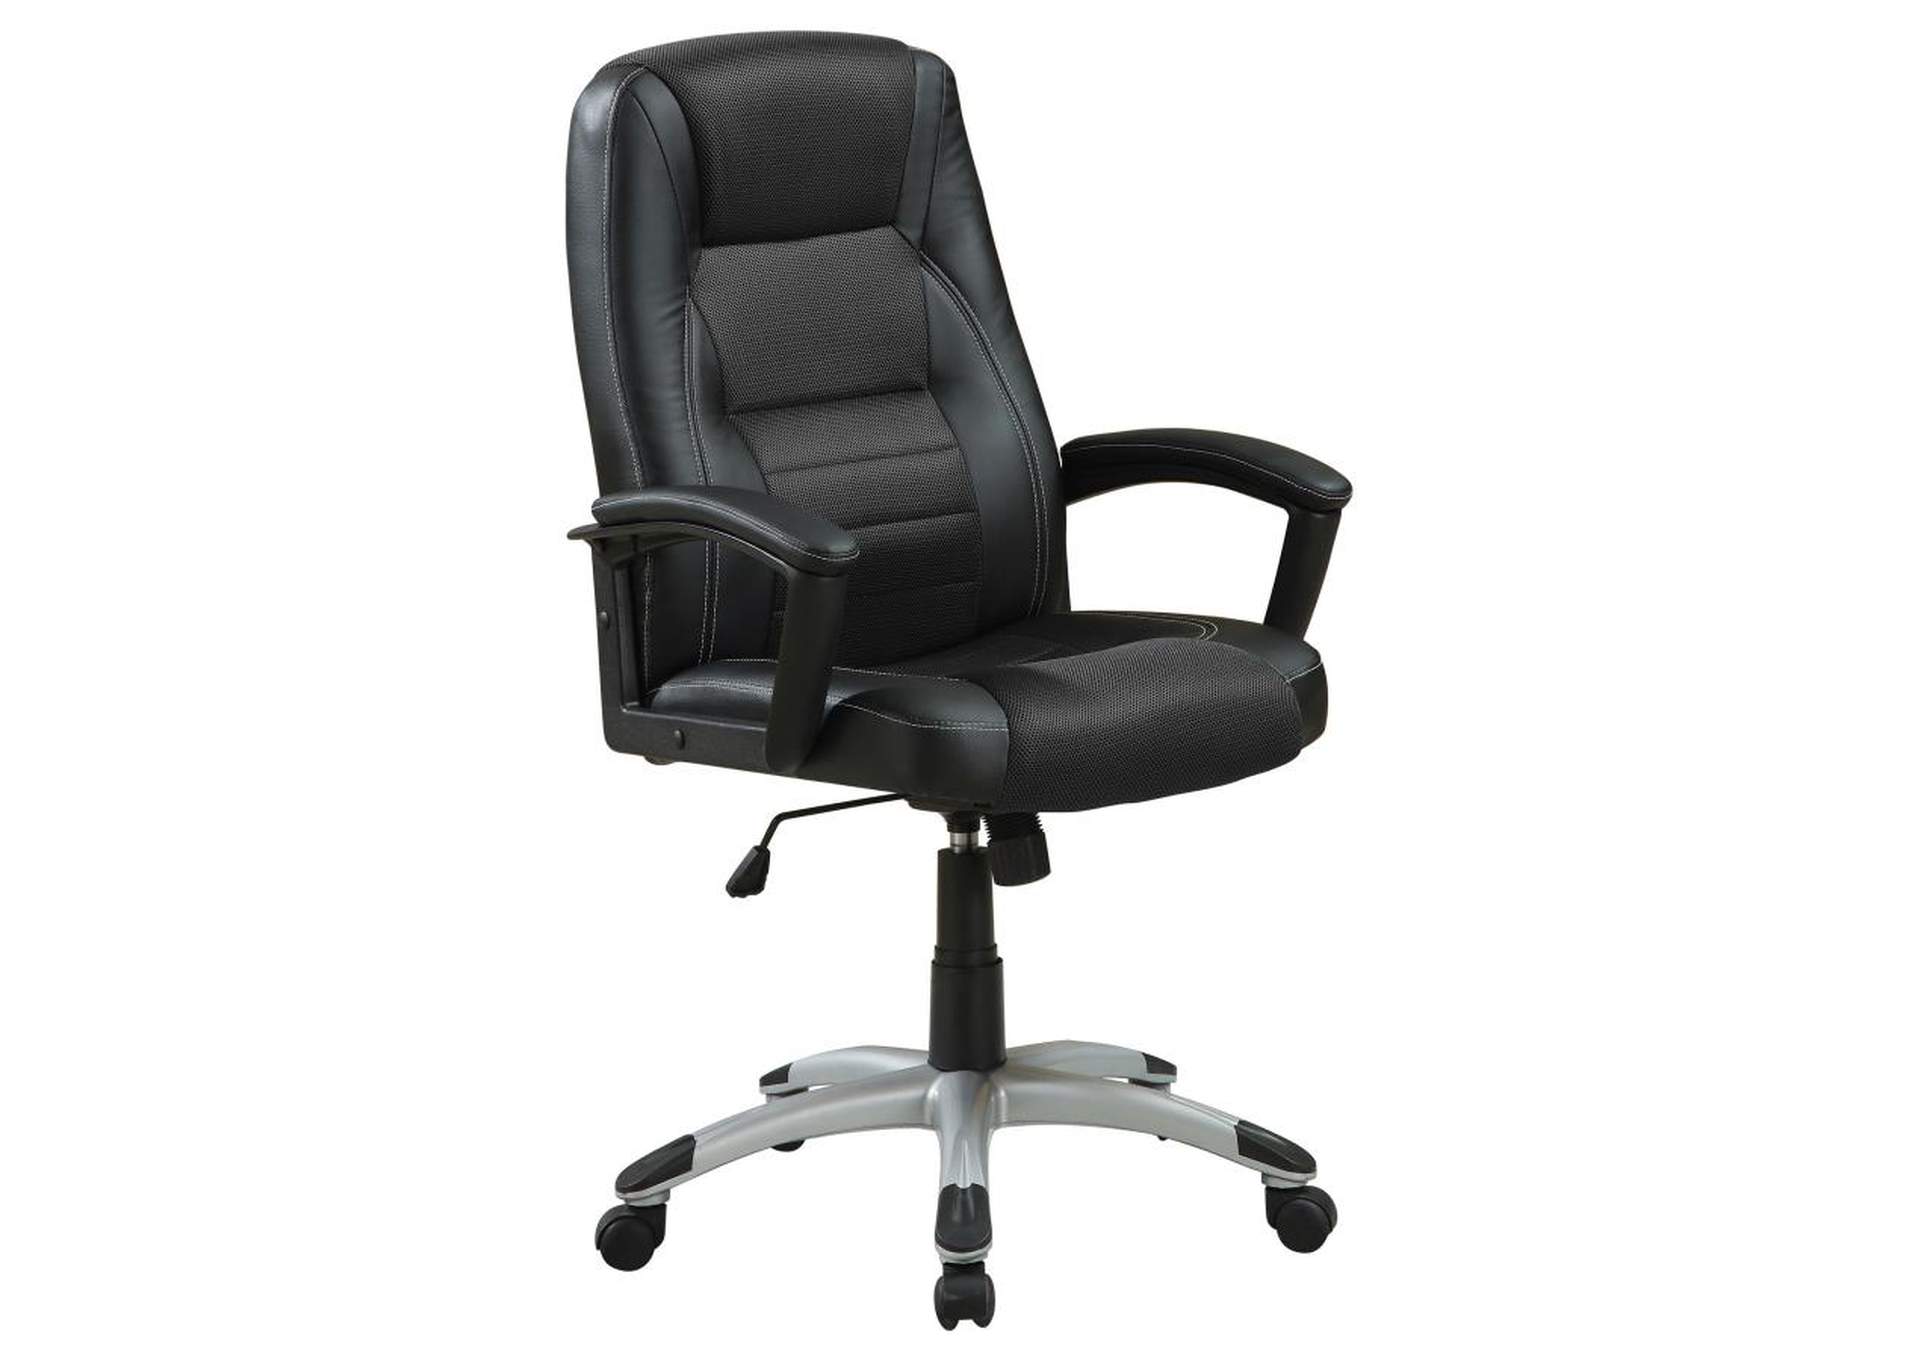 Dione Adjustable Height Office Chair Black,Coaster Furniture